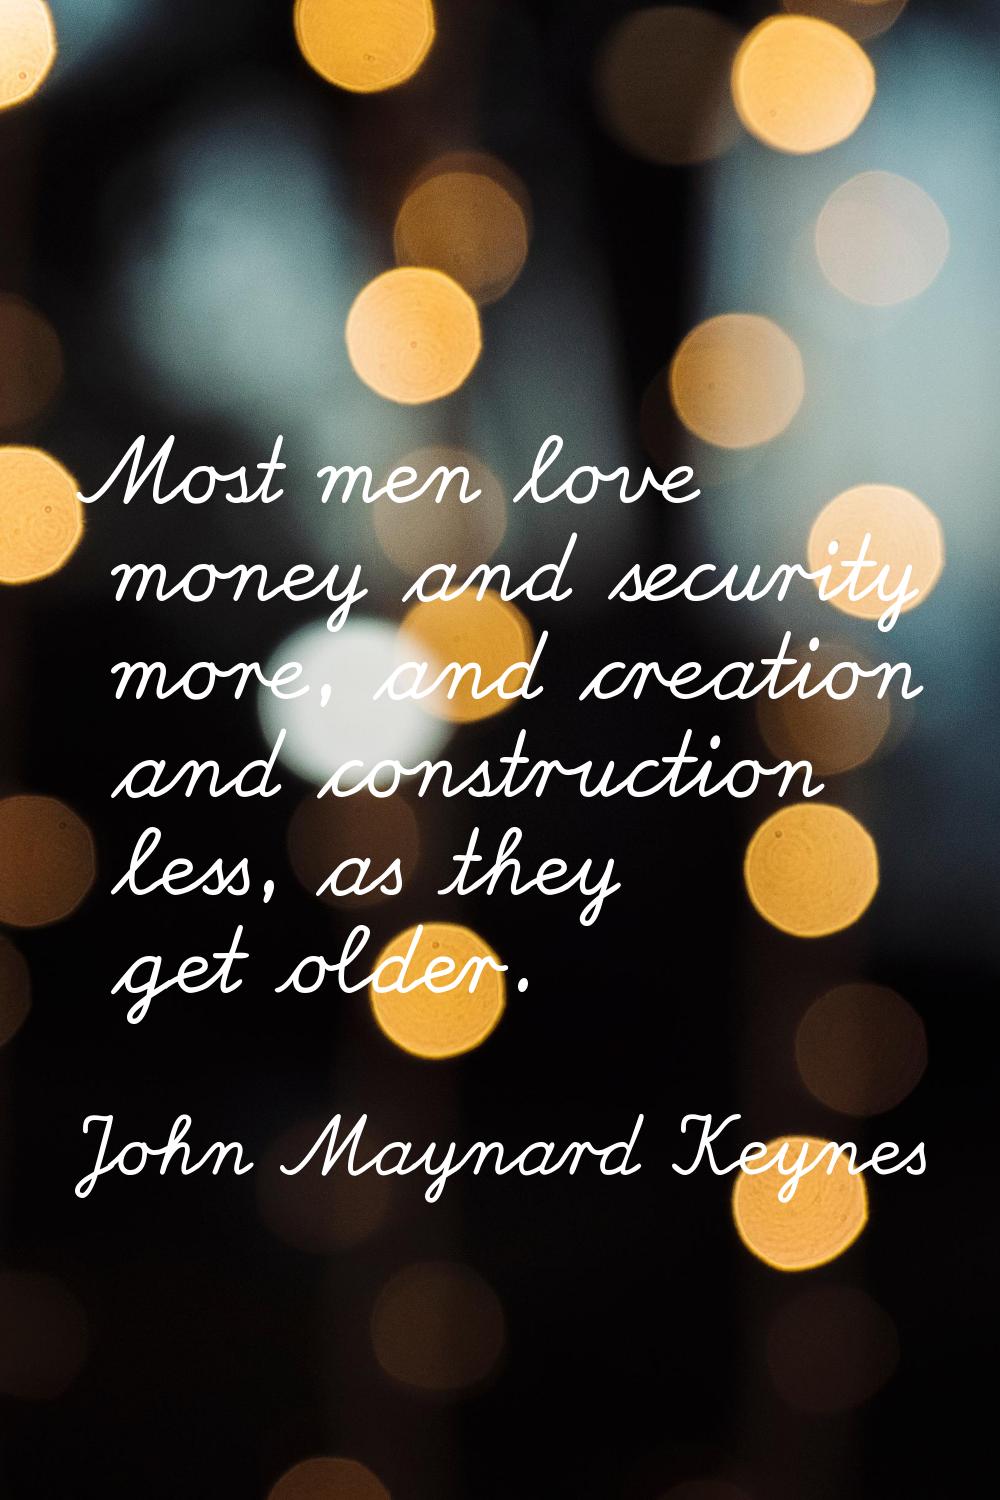 Most men love money and security more, and creation and construction less, as they get older.